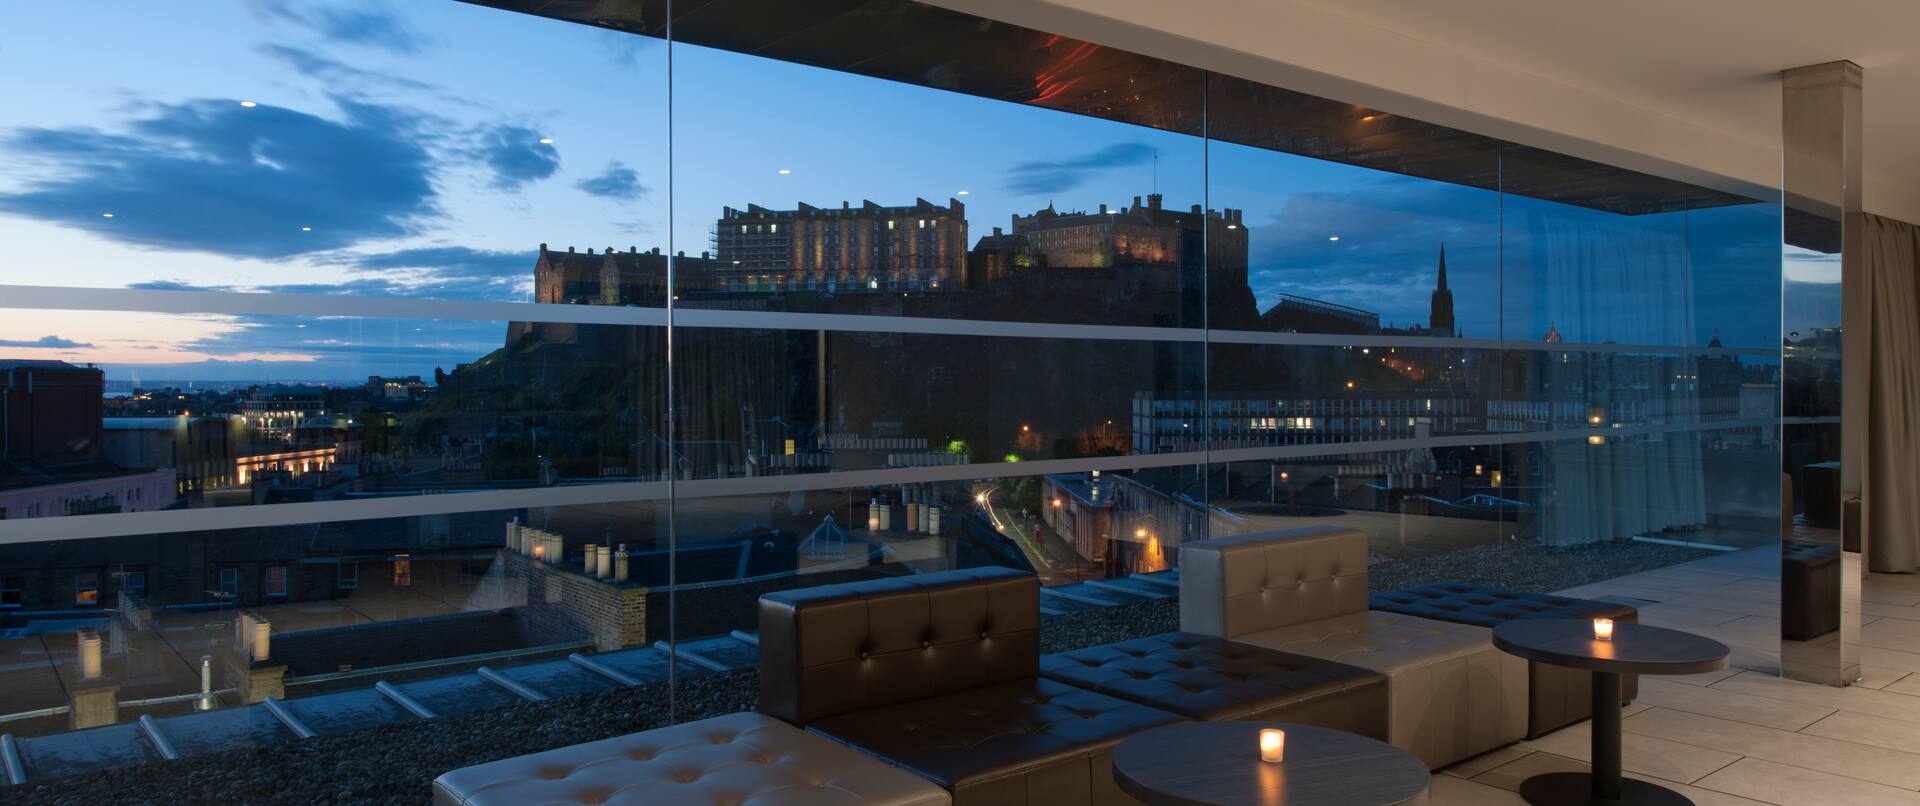 Tables With Illuminated Candles, and Lounge Seating by Large Window With View of Illuminated Castle at Dusk in SKYbar 